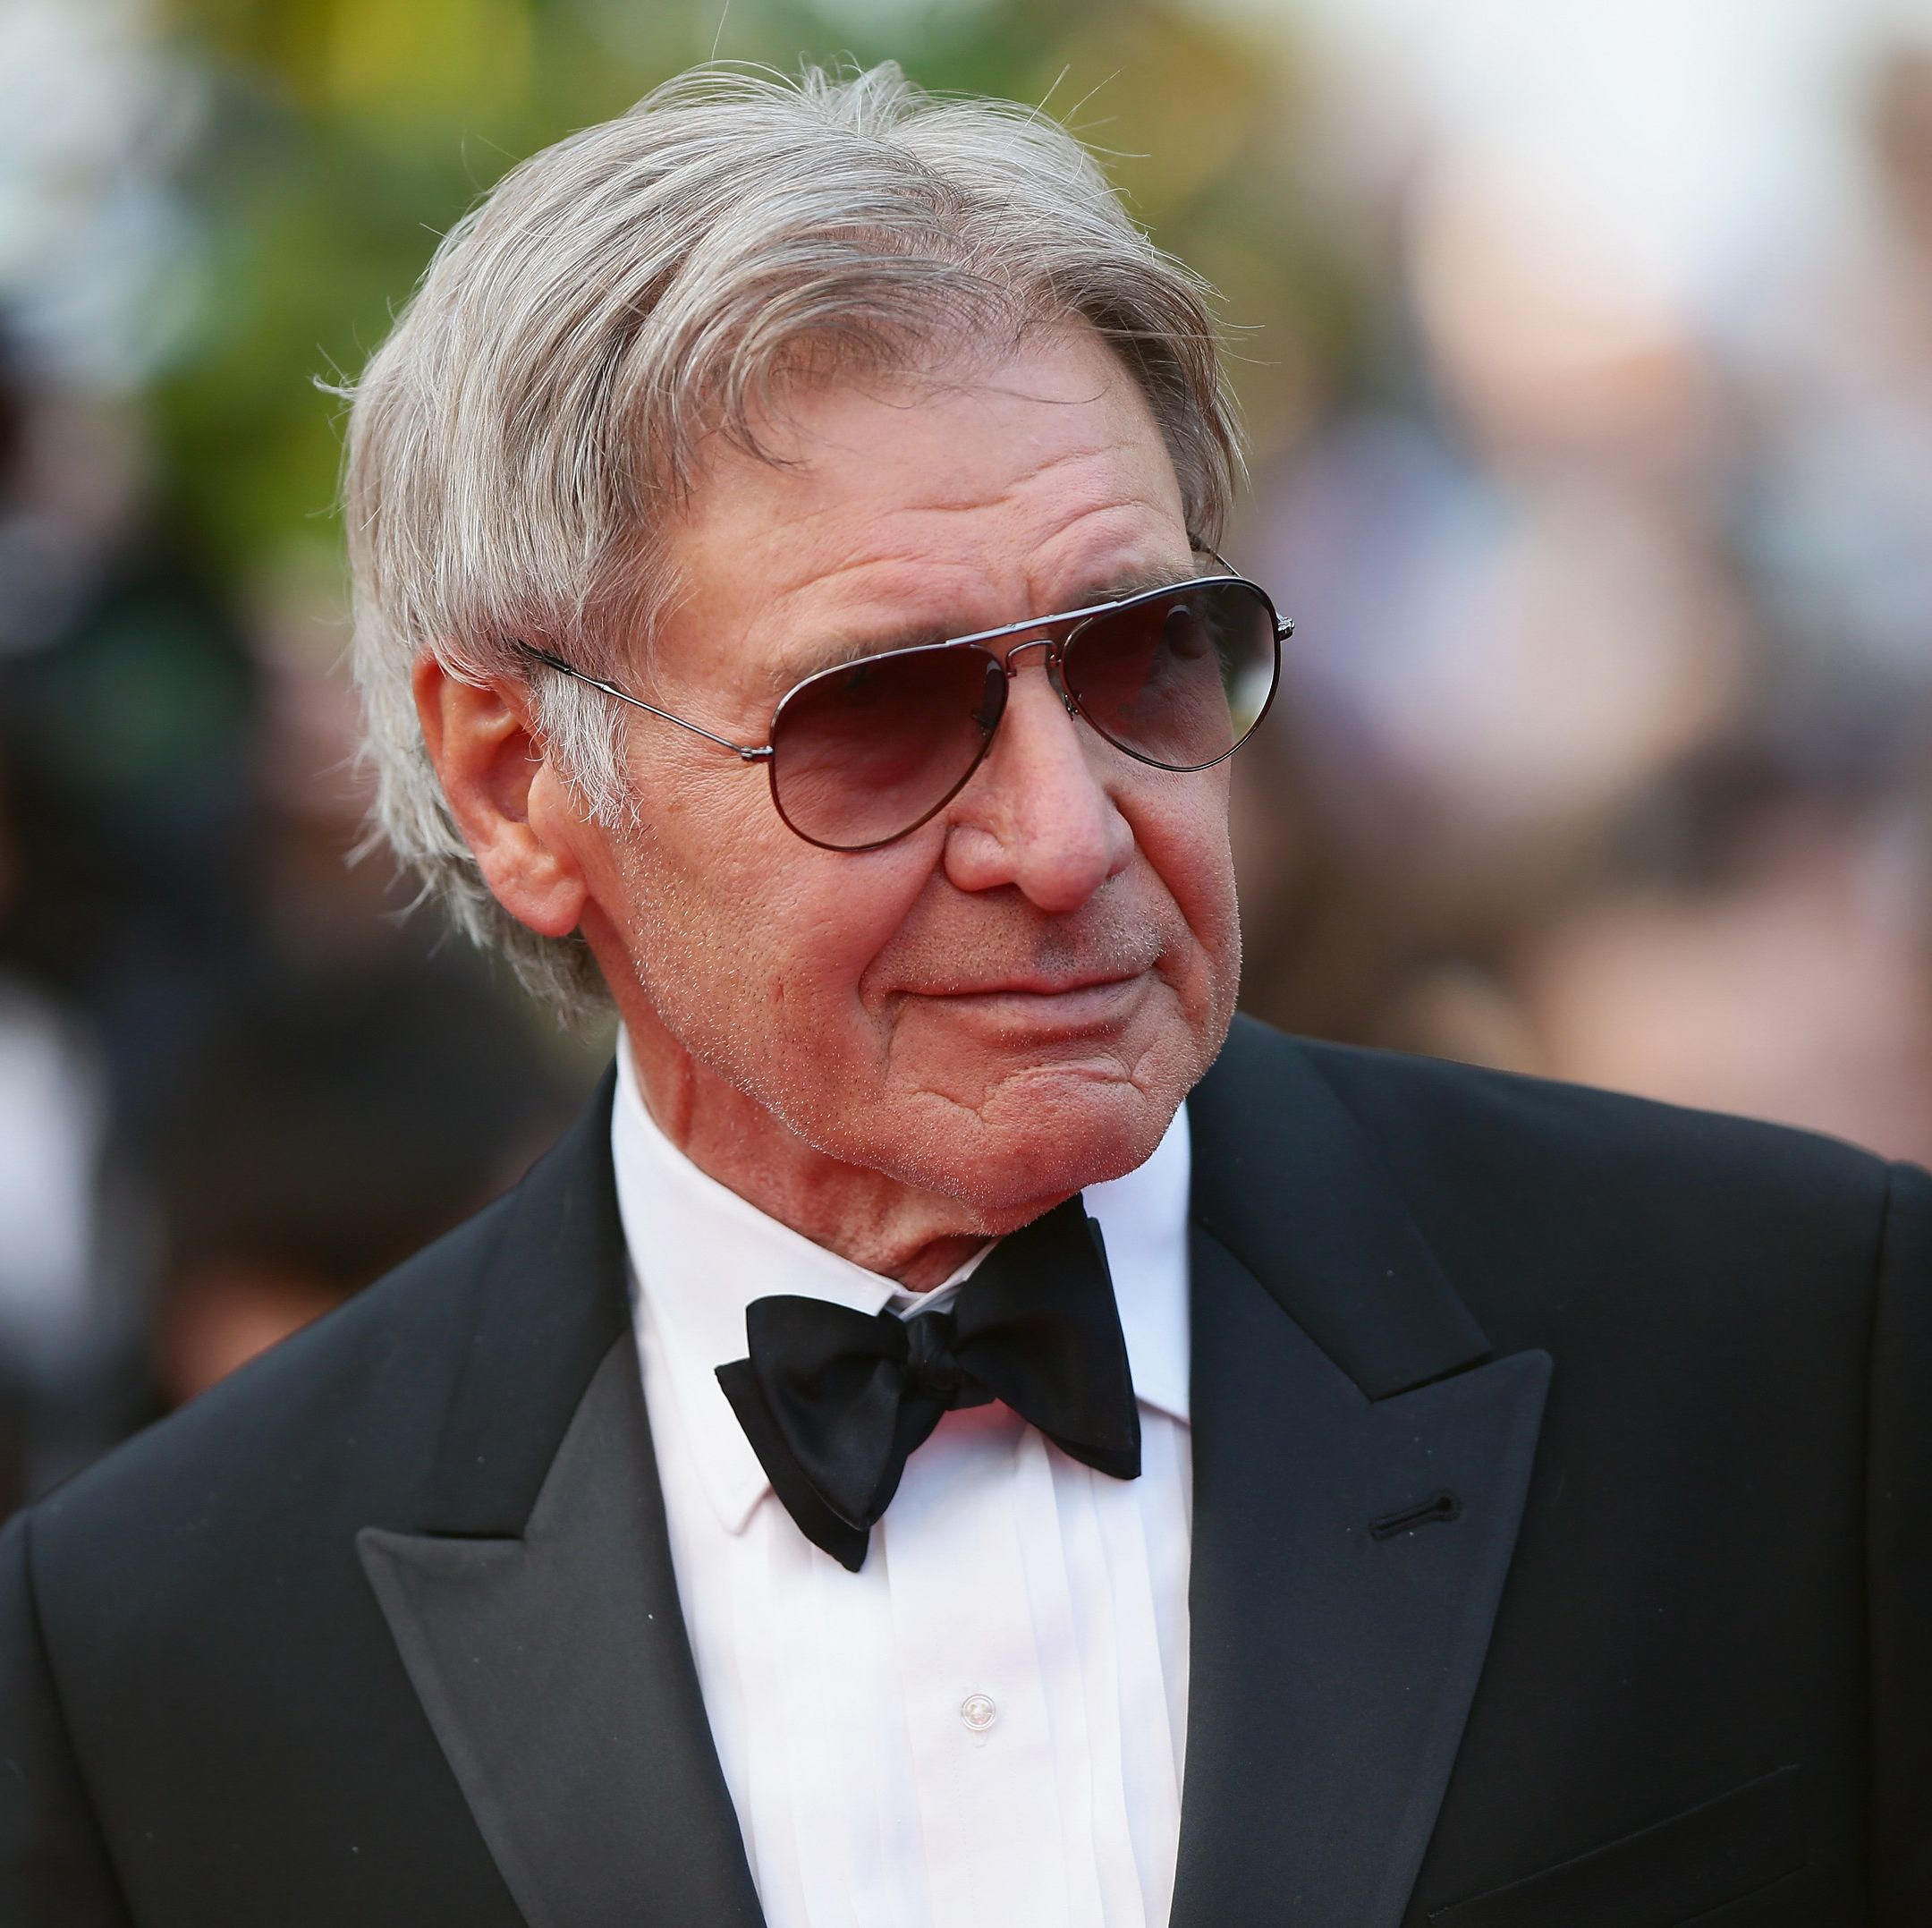 Harrison Ford Was Once the Highest-Grossing Actor in the World, and His Net Worth Shows It